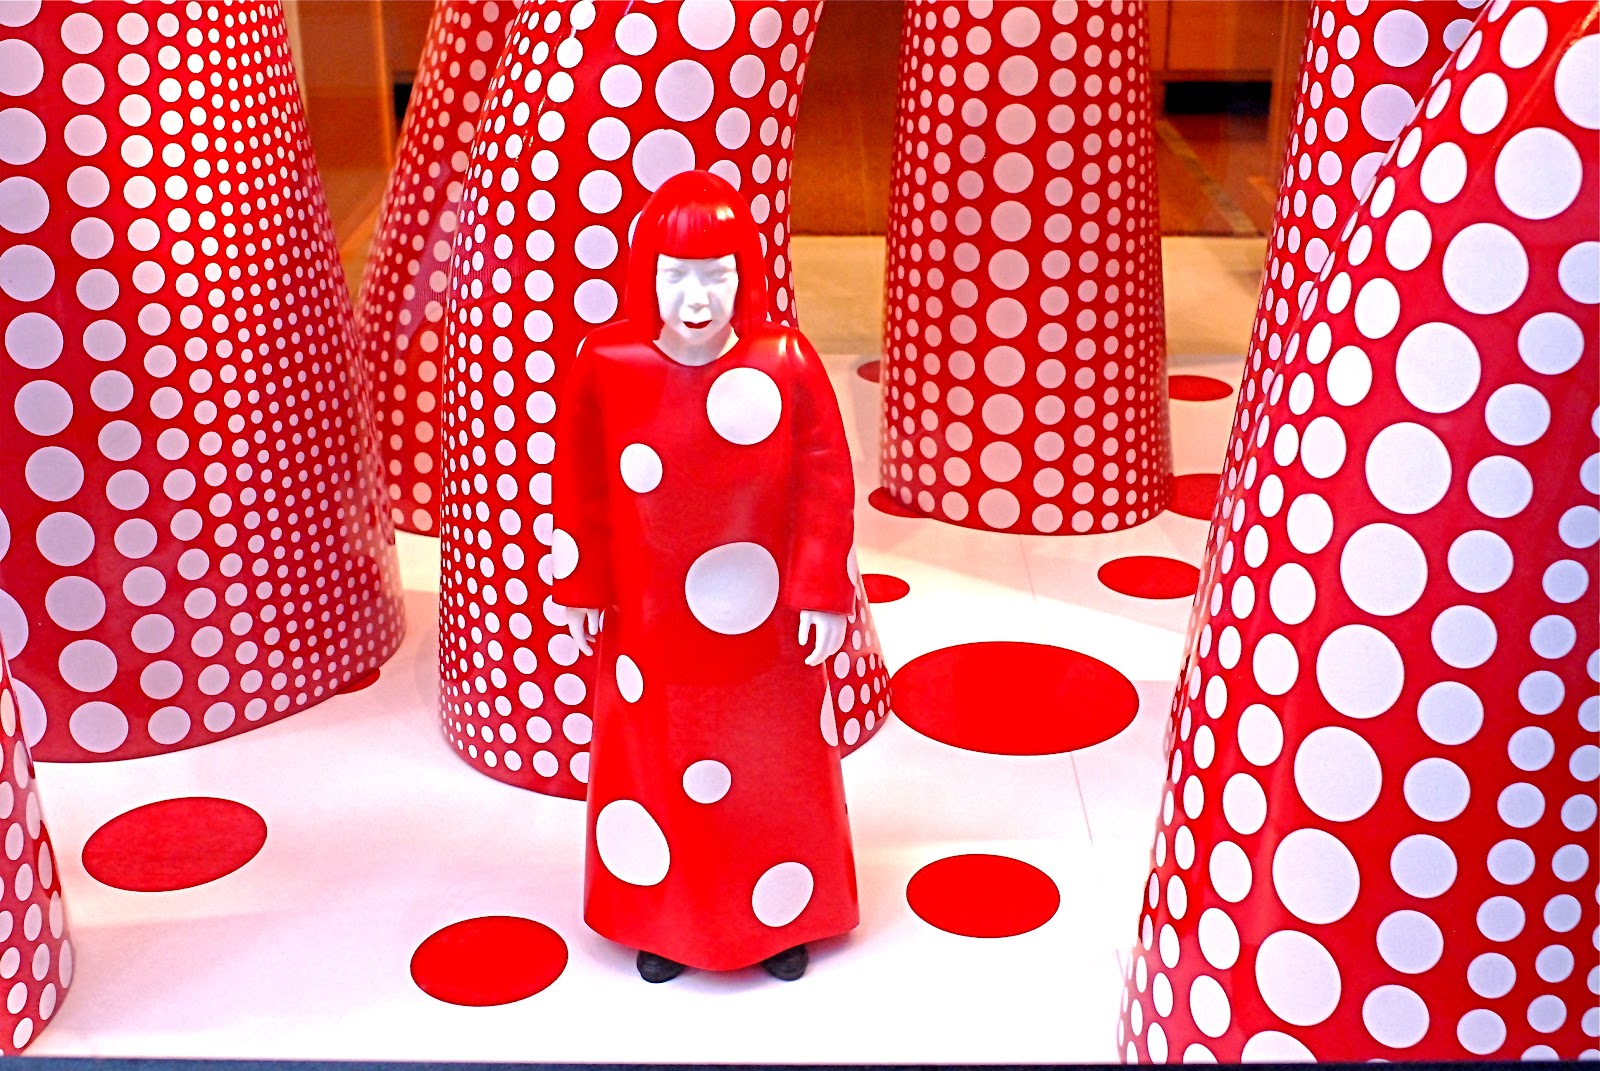 NYC ♥ NYC: Louis Vuitton Collaborates With Artist Yayoi Kusama - Manhattan  Flagship Store Facade and Window Displays On Fifth Avenue Go Polka Dots